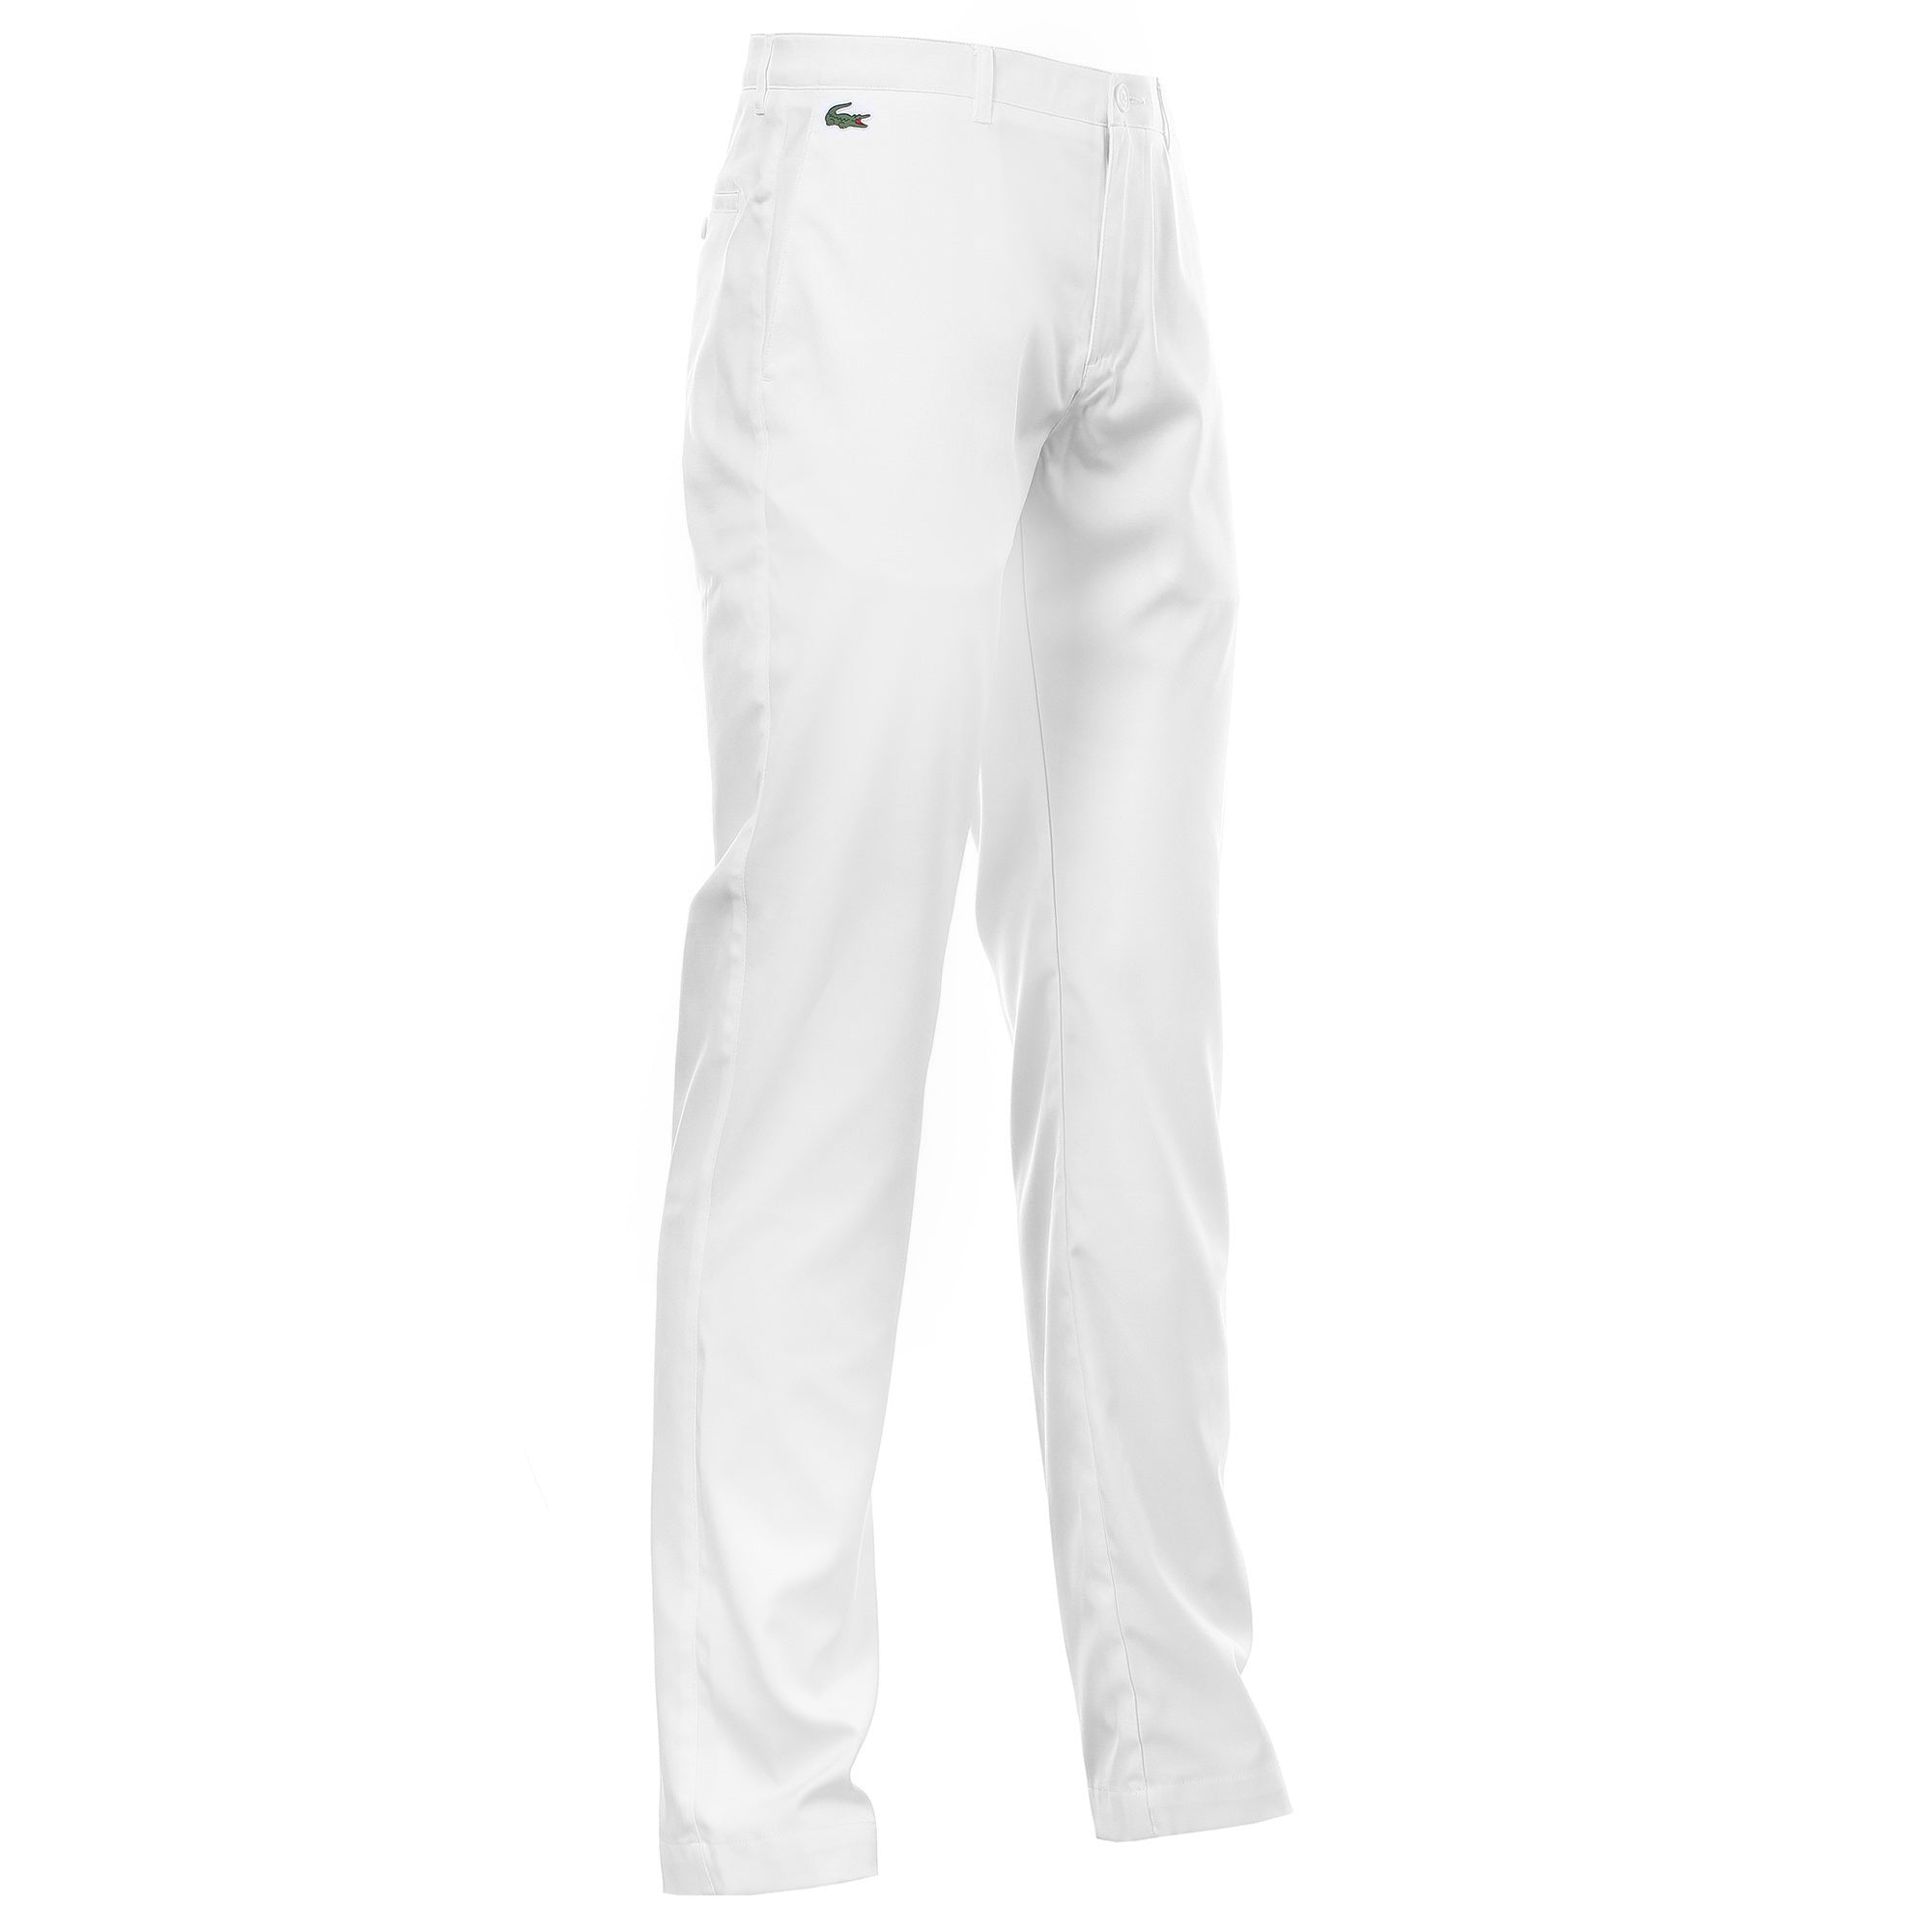 Lacoste Technical Chino Pant HH9528 White 001 | Function18 | Restrictedgs